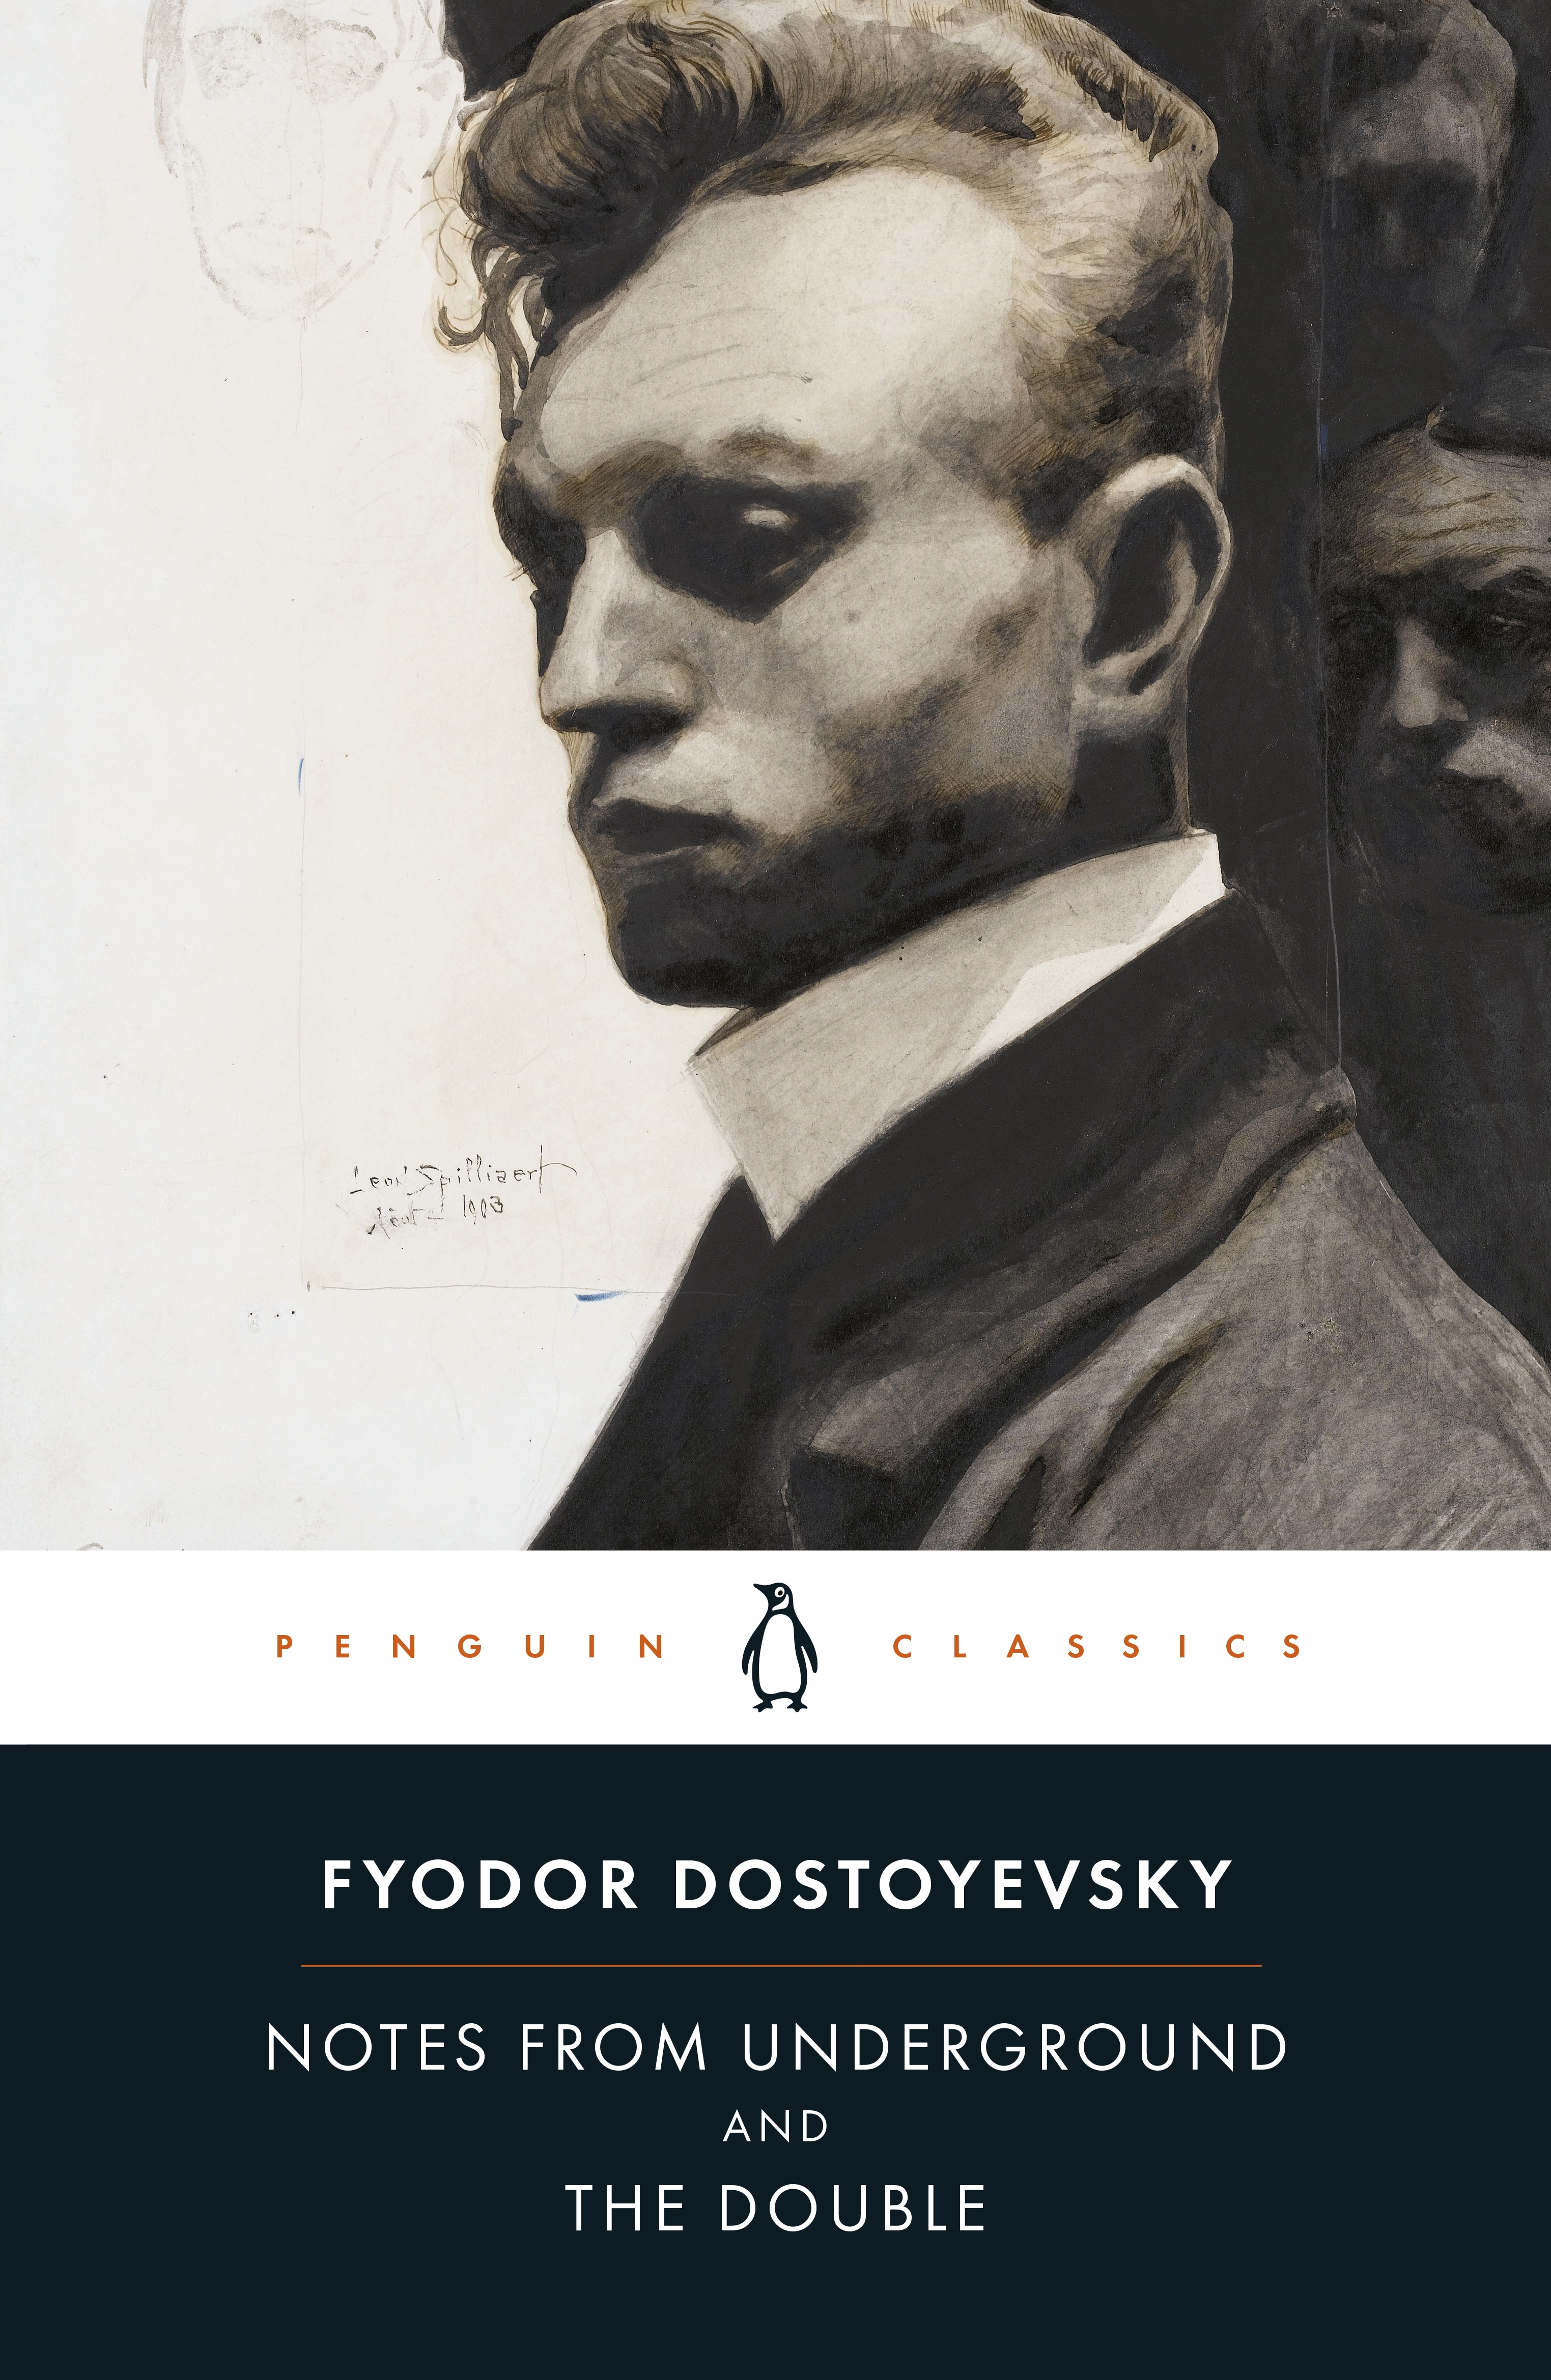 Book “Notes from Underground and the Double” by Fyodor Dostoyevsky — January 29, 2009